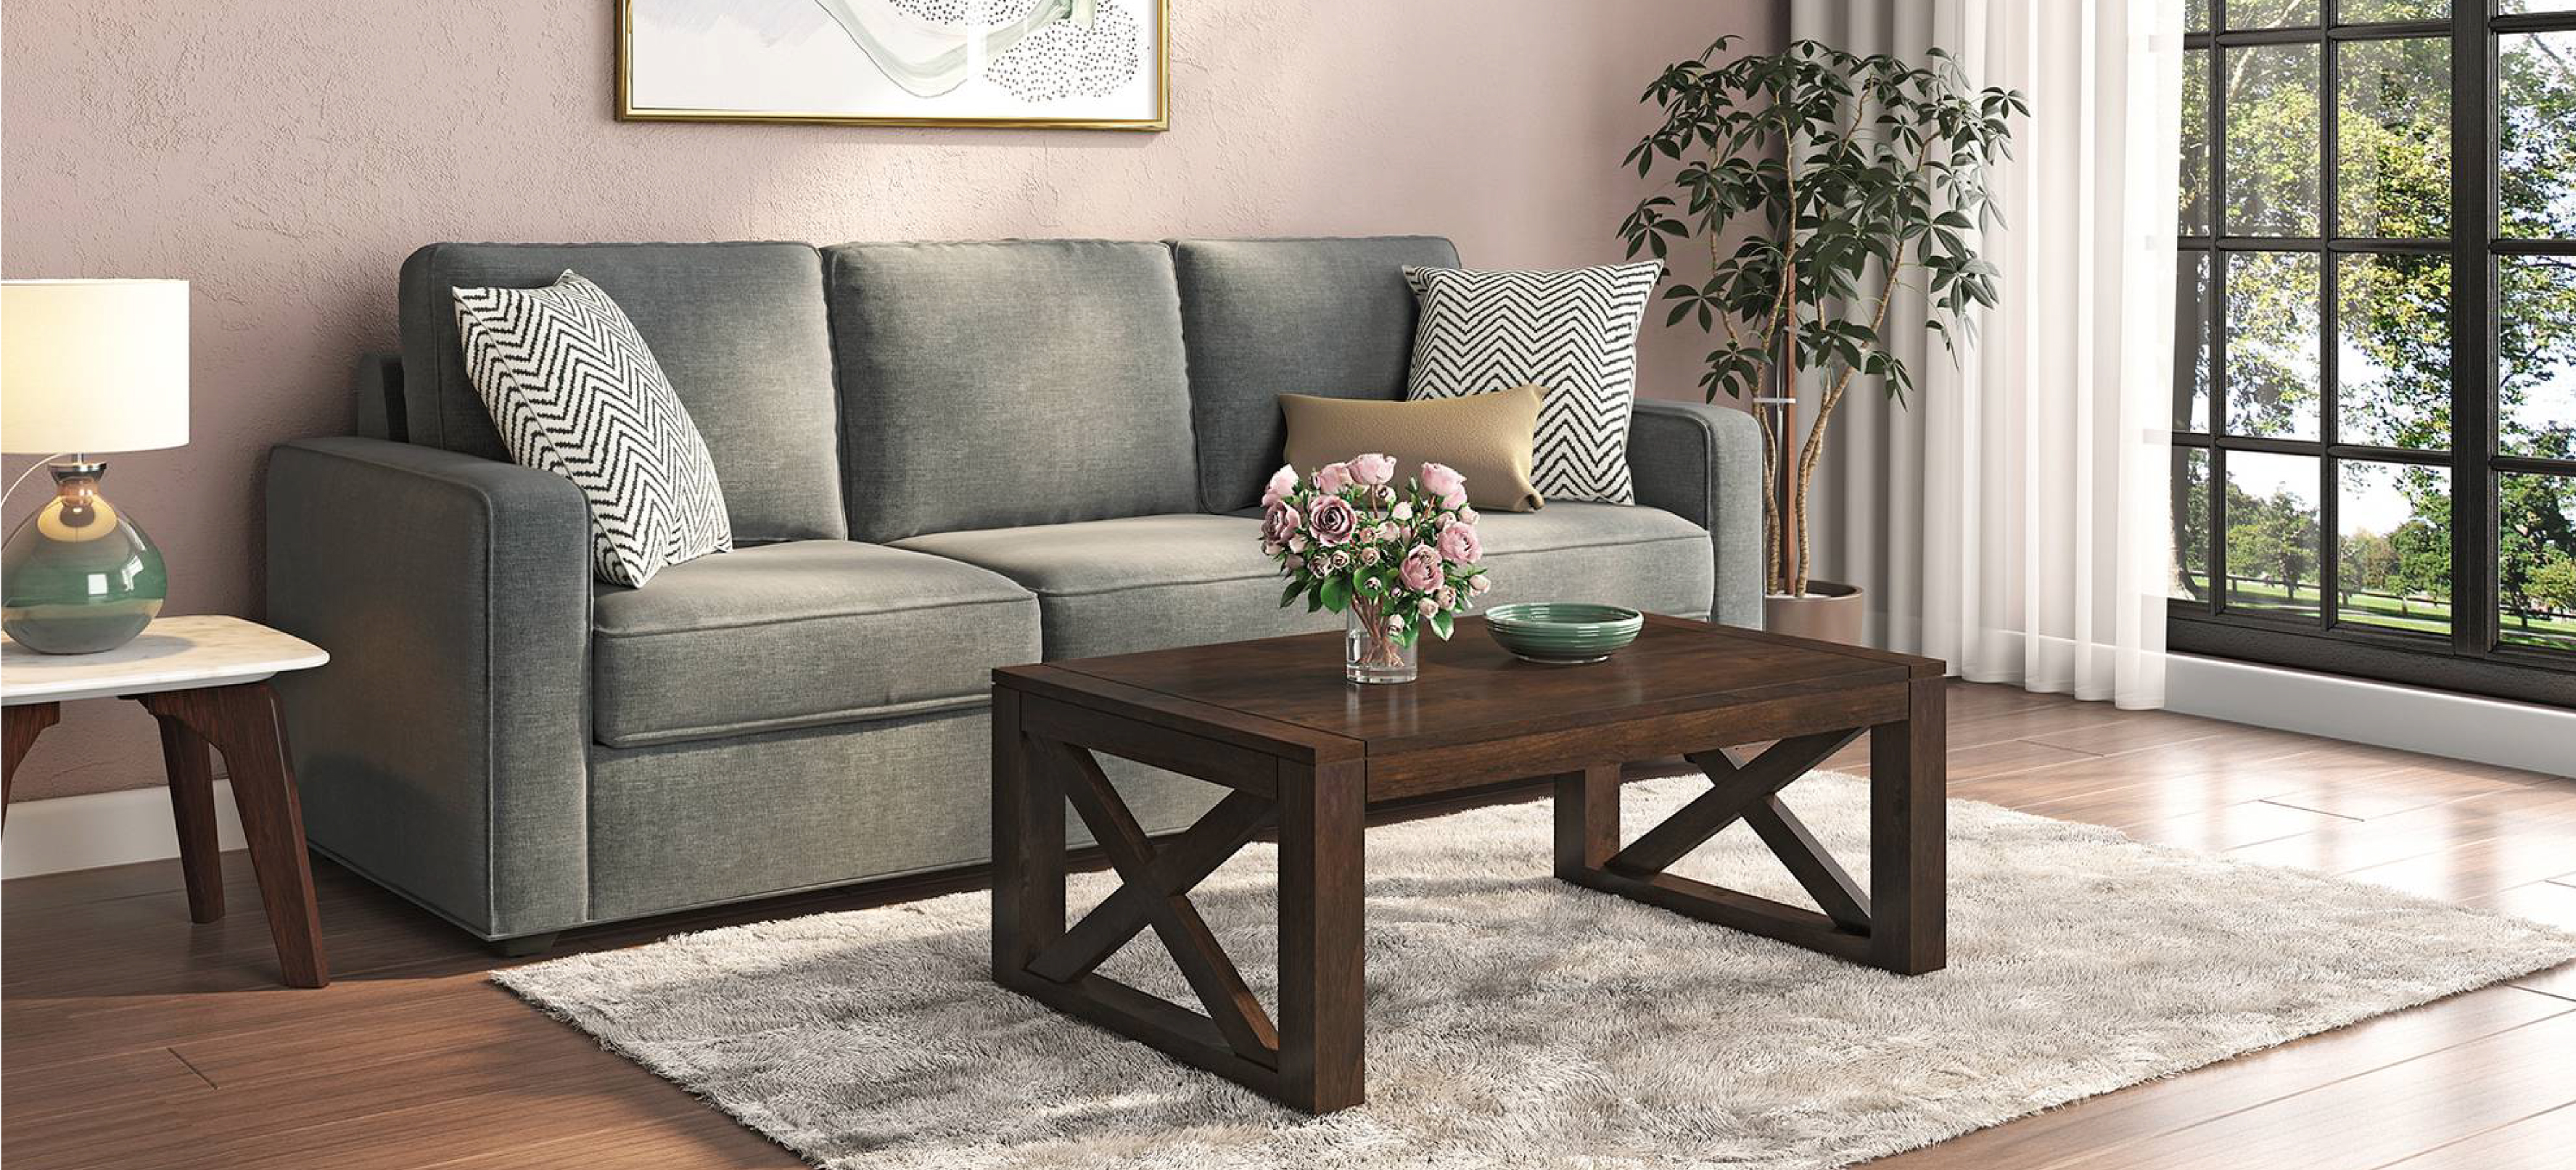 Aesthetic Living Room With Coffee Table